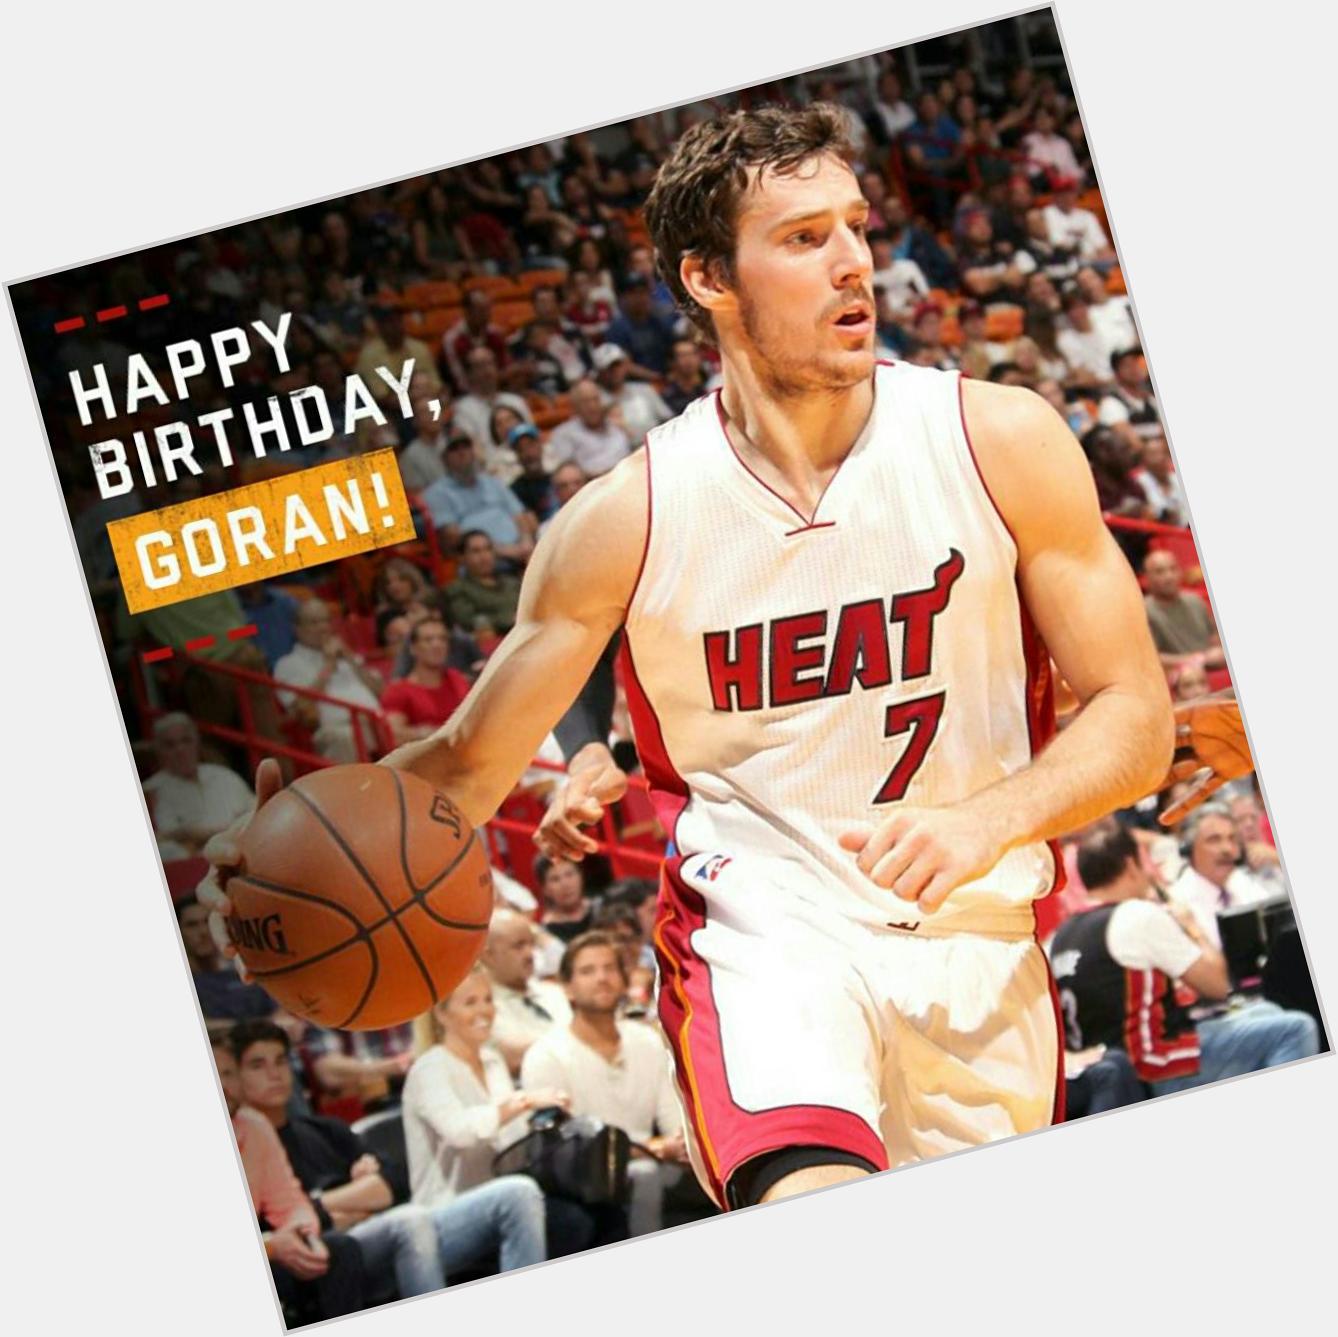 HEAT Nation, join us in wishing a very happy birthday! 